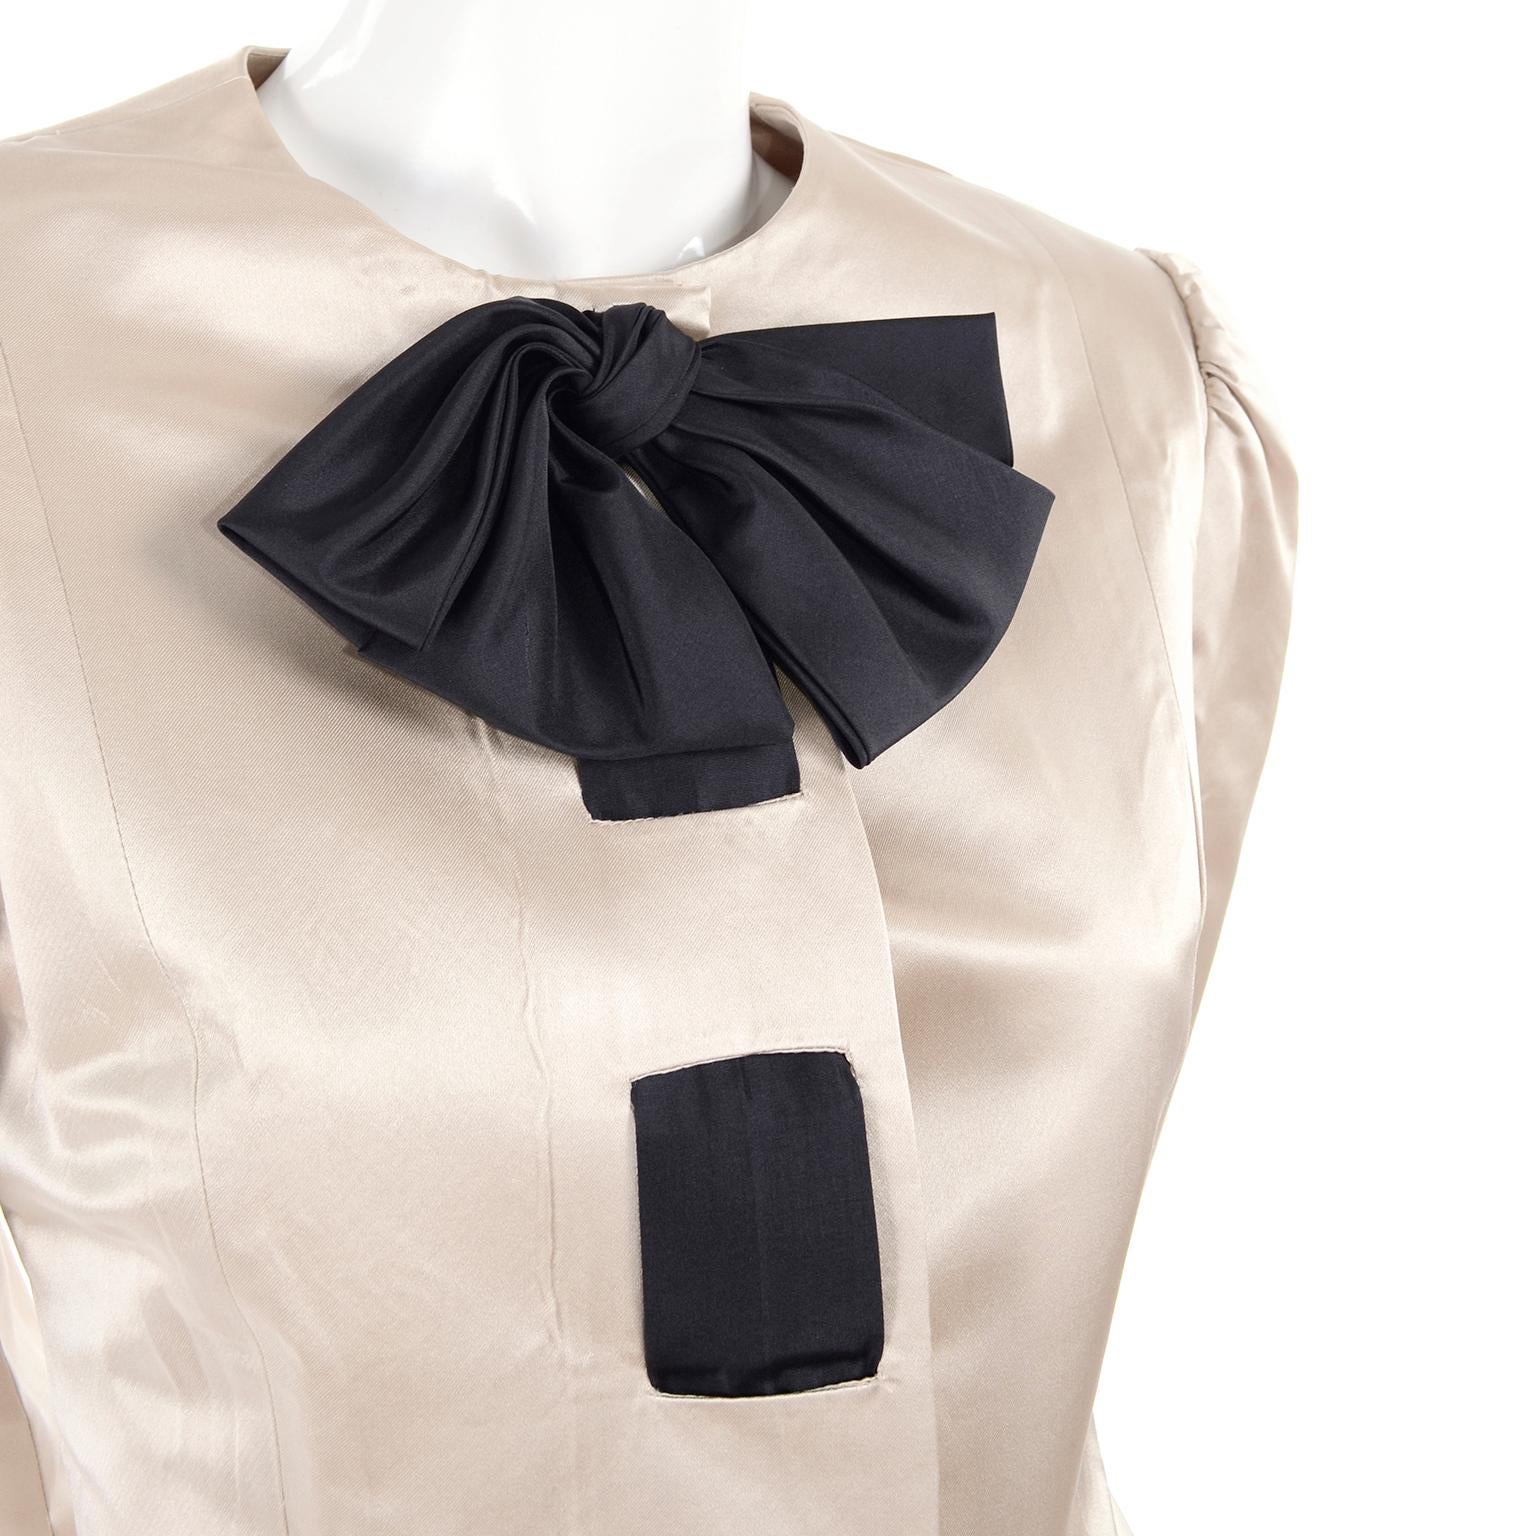 Beige Albert Nipon Early Vintage Rayon Silk Satin 2 Pc Dress Skirt Suit With Black Bow For Sale